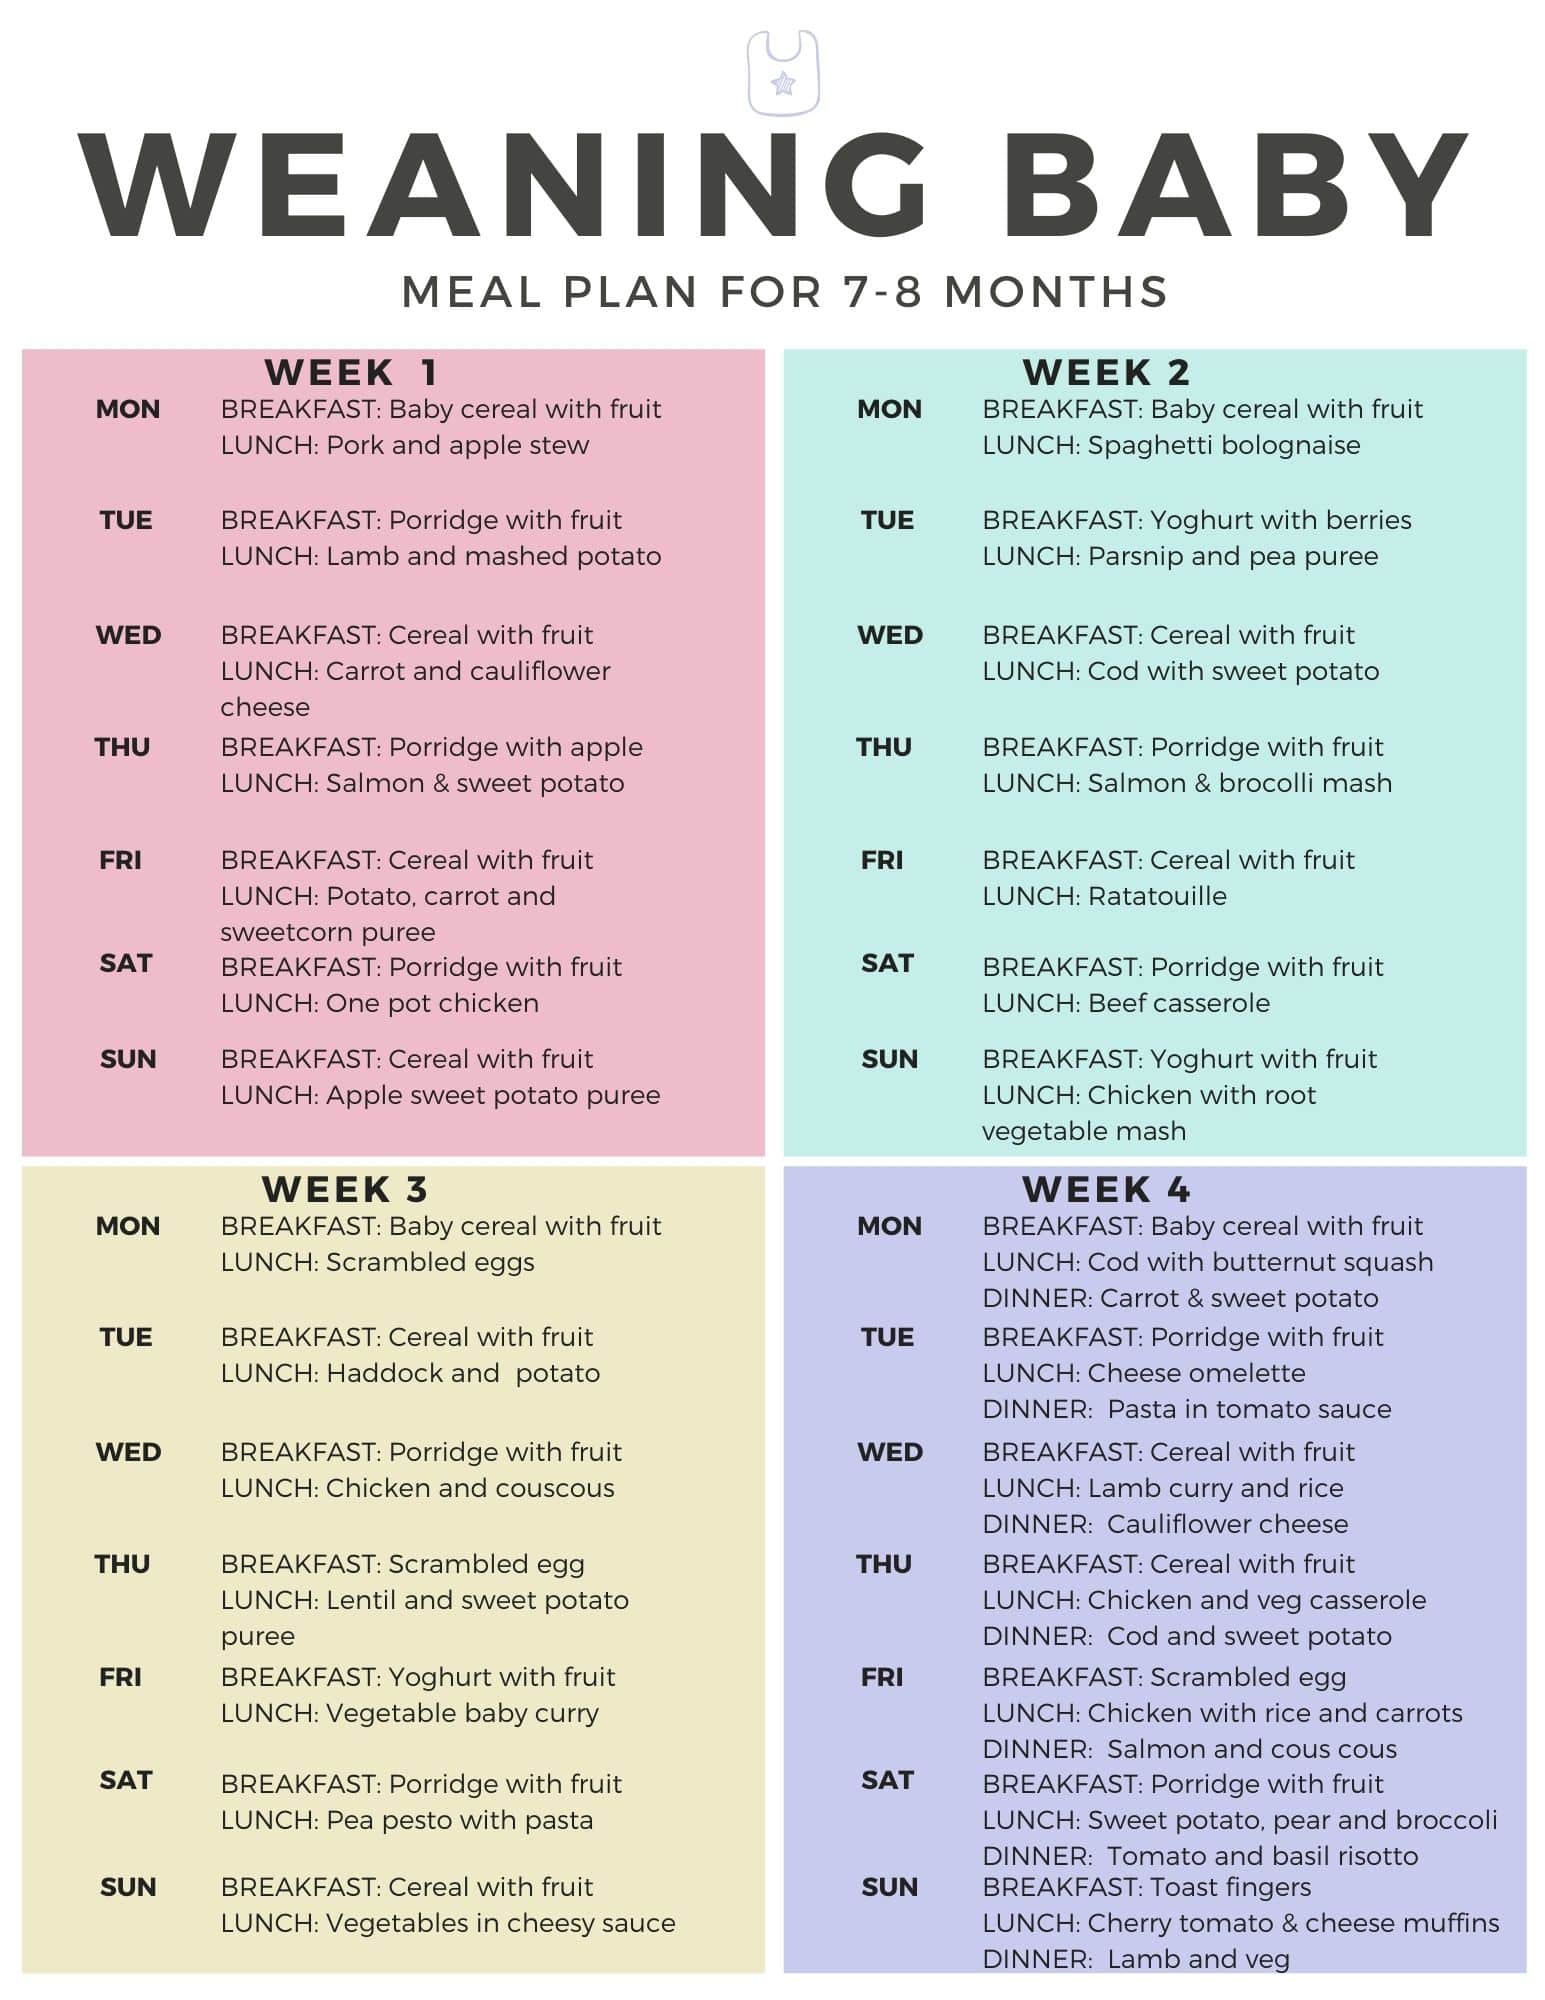 Weaning baby meal plan and routine at 7 months - The Mummy Bubble